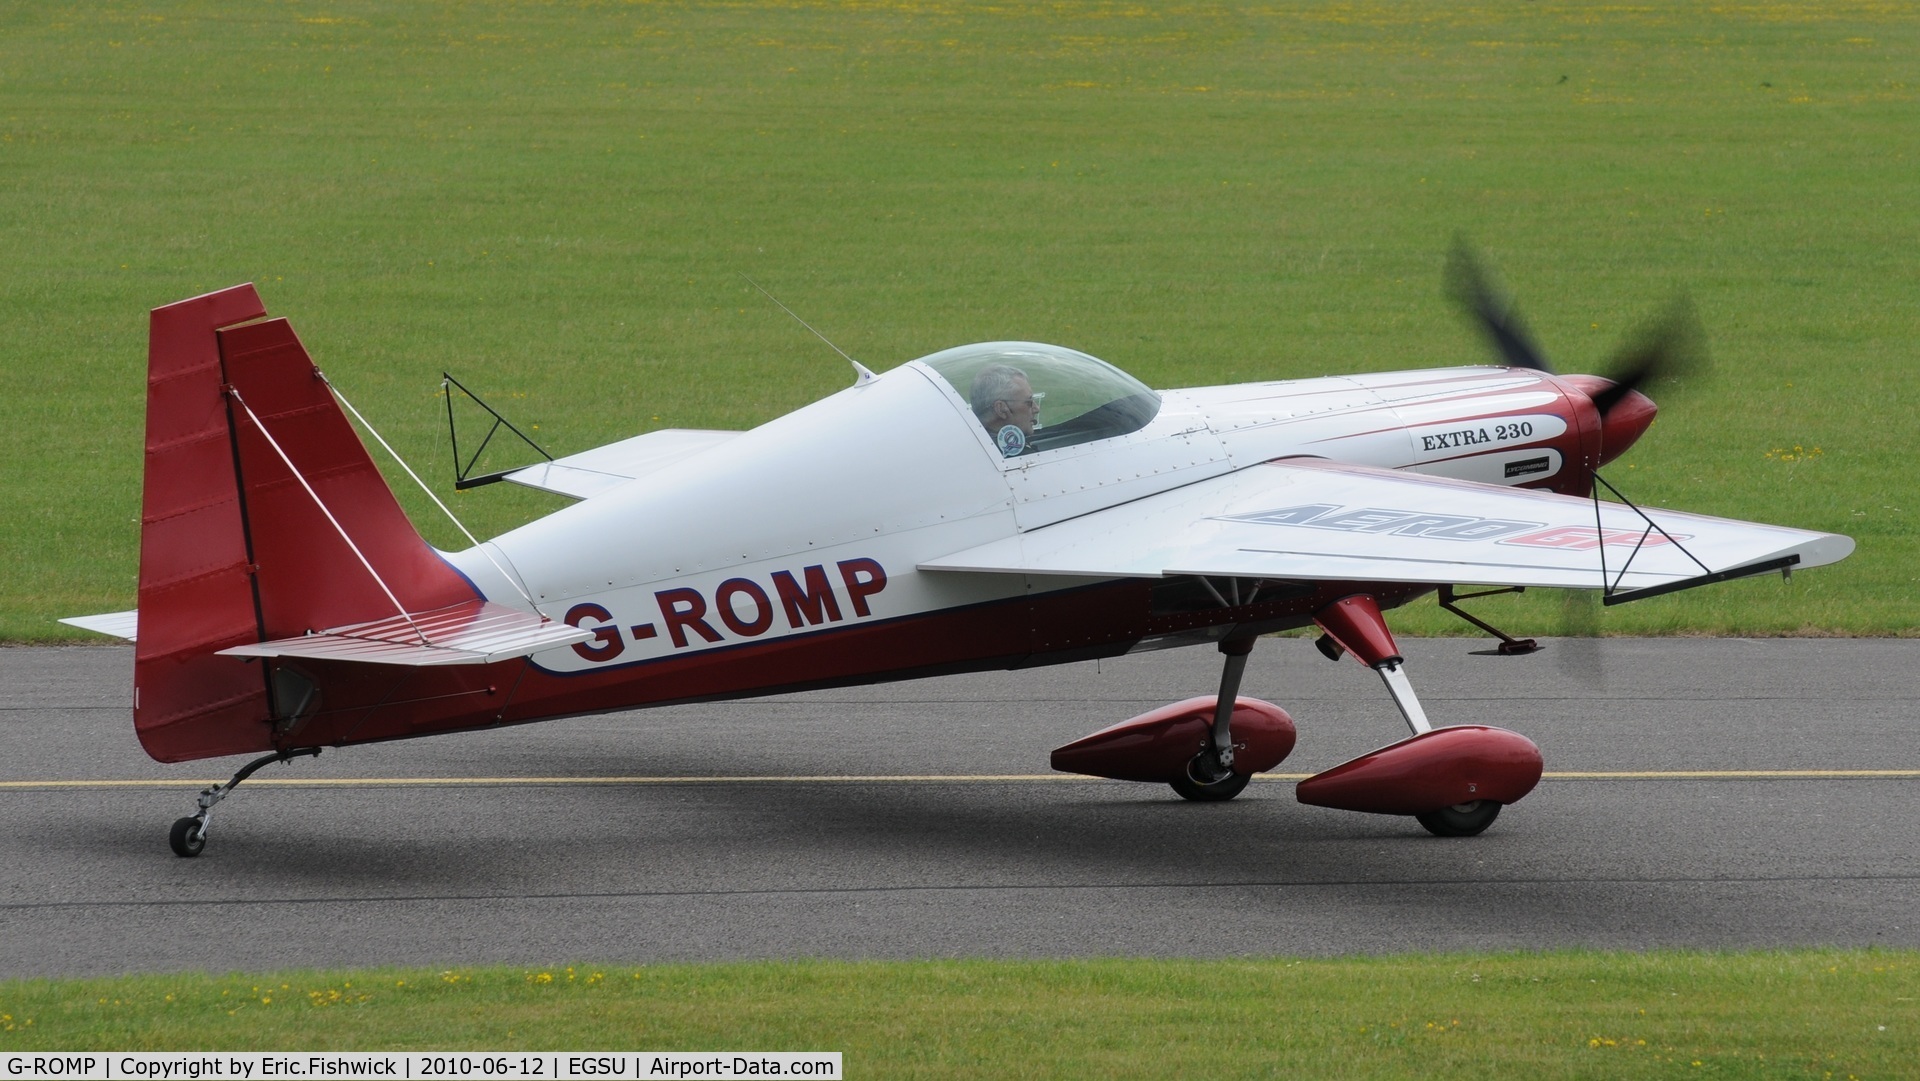 G-ROMP, 1987 Extra EA-230H C/N 001, G-ROMP at The Duxford Trophy Aerobatic Contest, June 2010